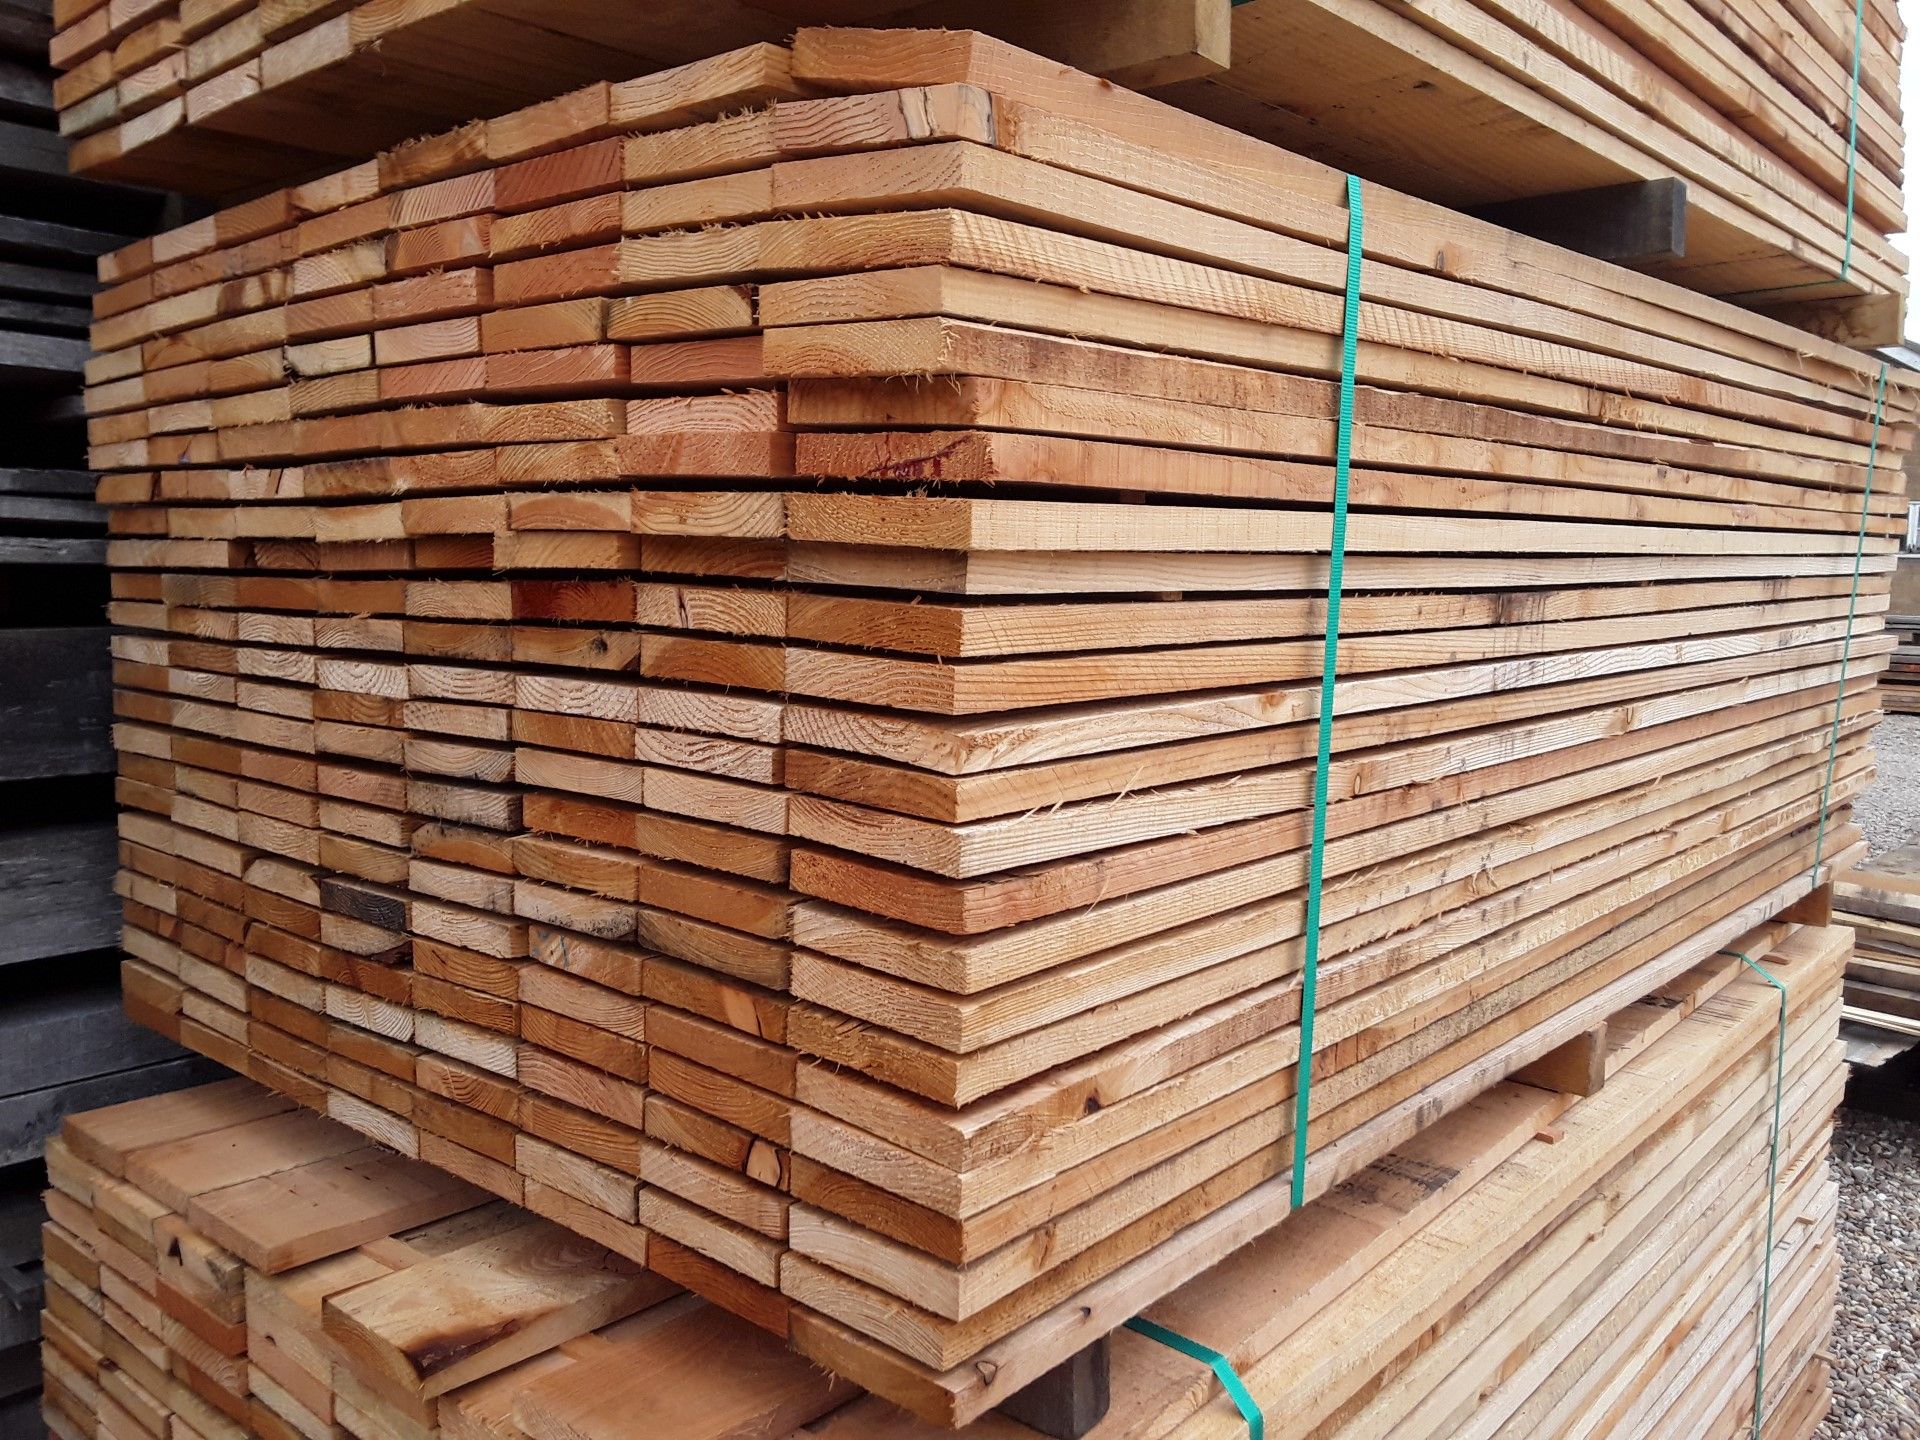 50x Softwood Sawn Timber Mixed Larch / Douglas Fir Boards - Image 2 of 6